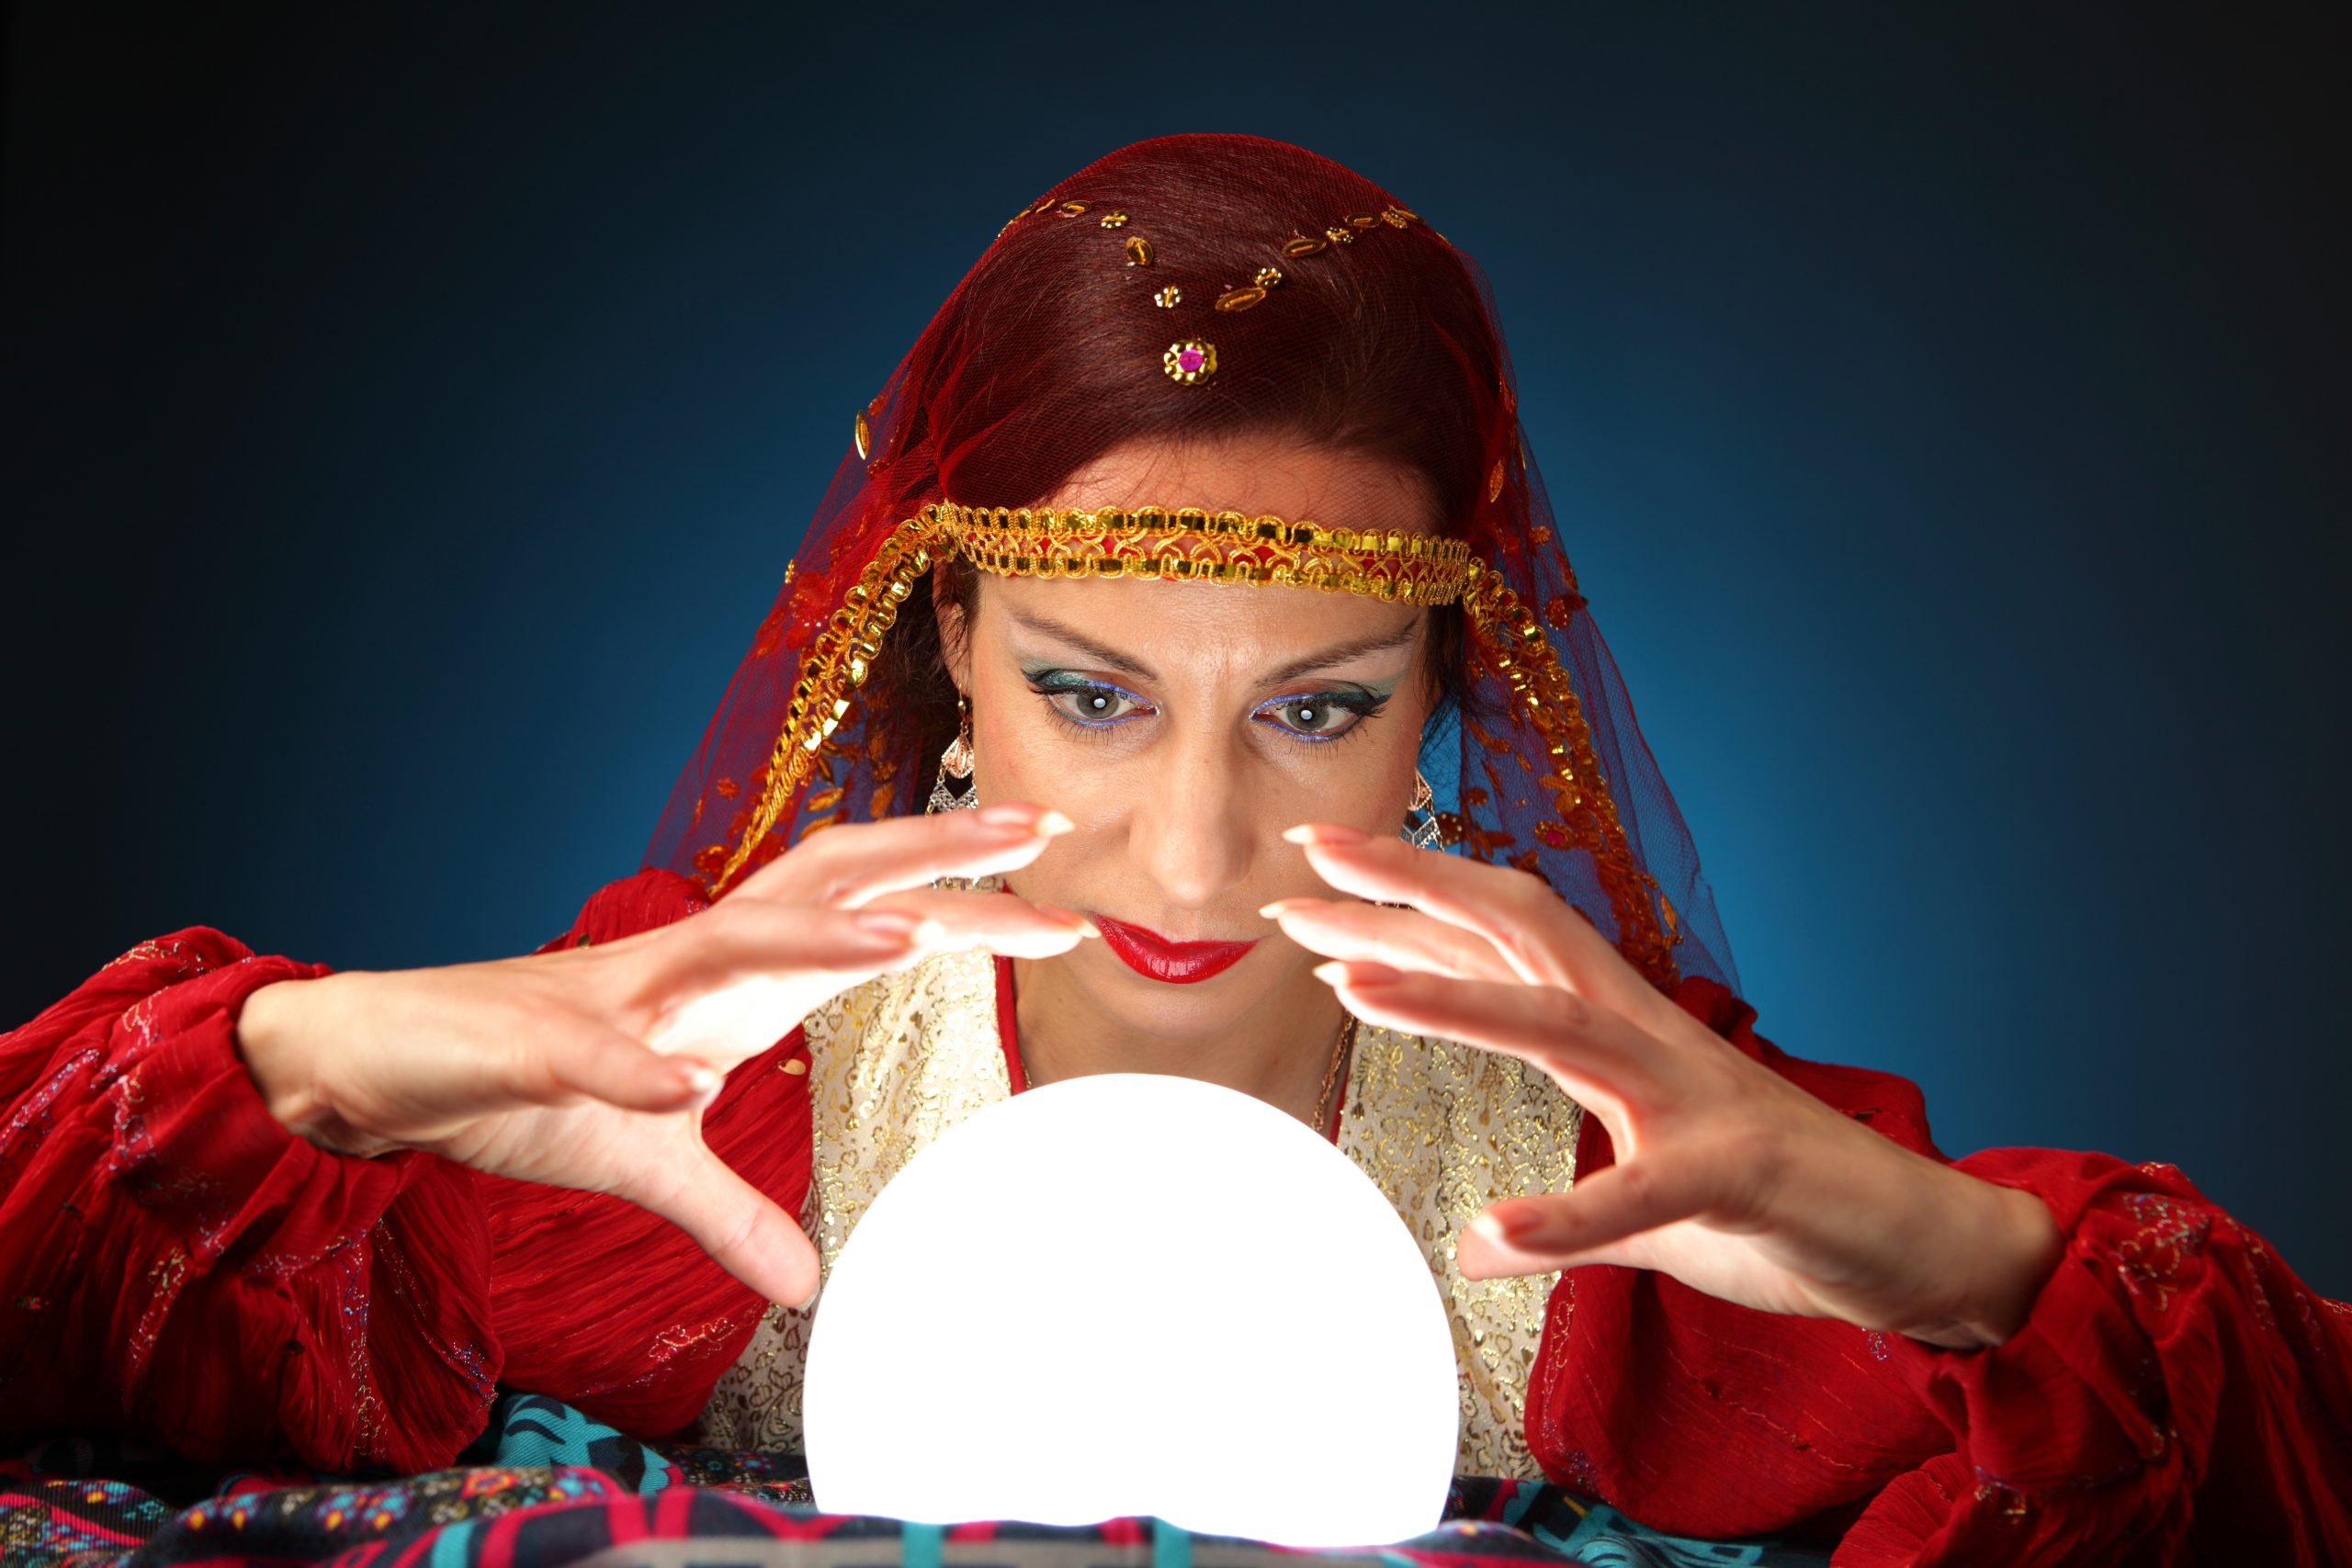 Woman dressed in fortune-tellers costume peering into a lighted crystal ball.